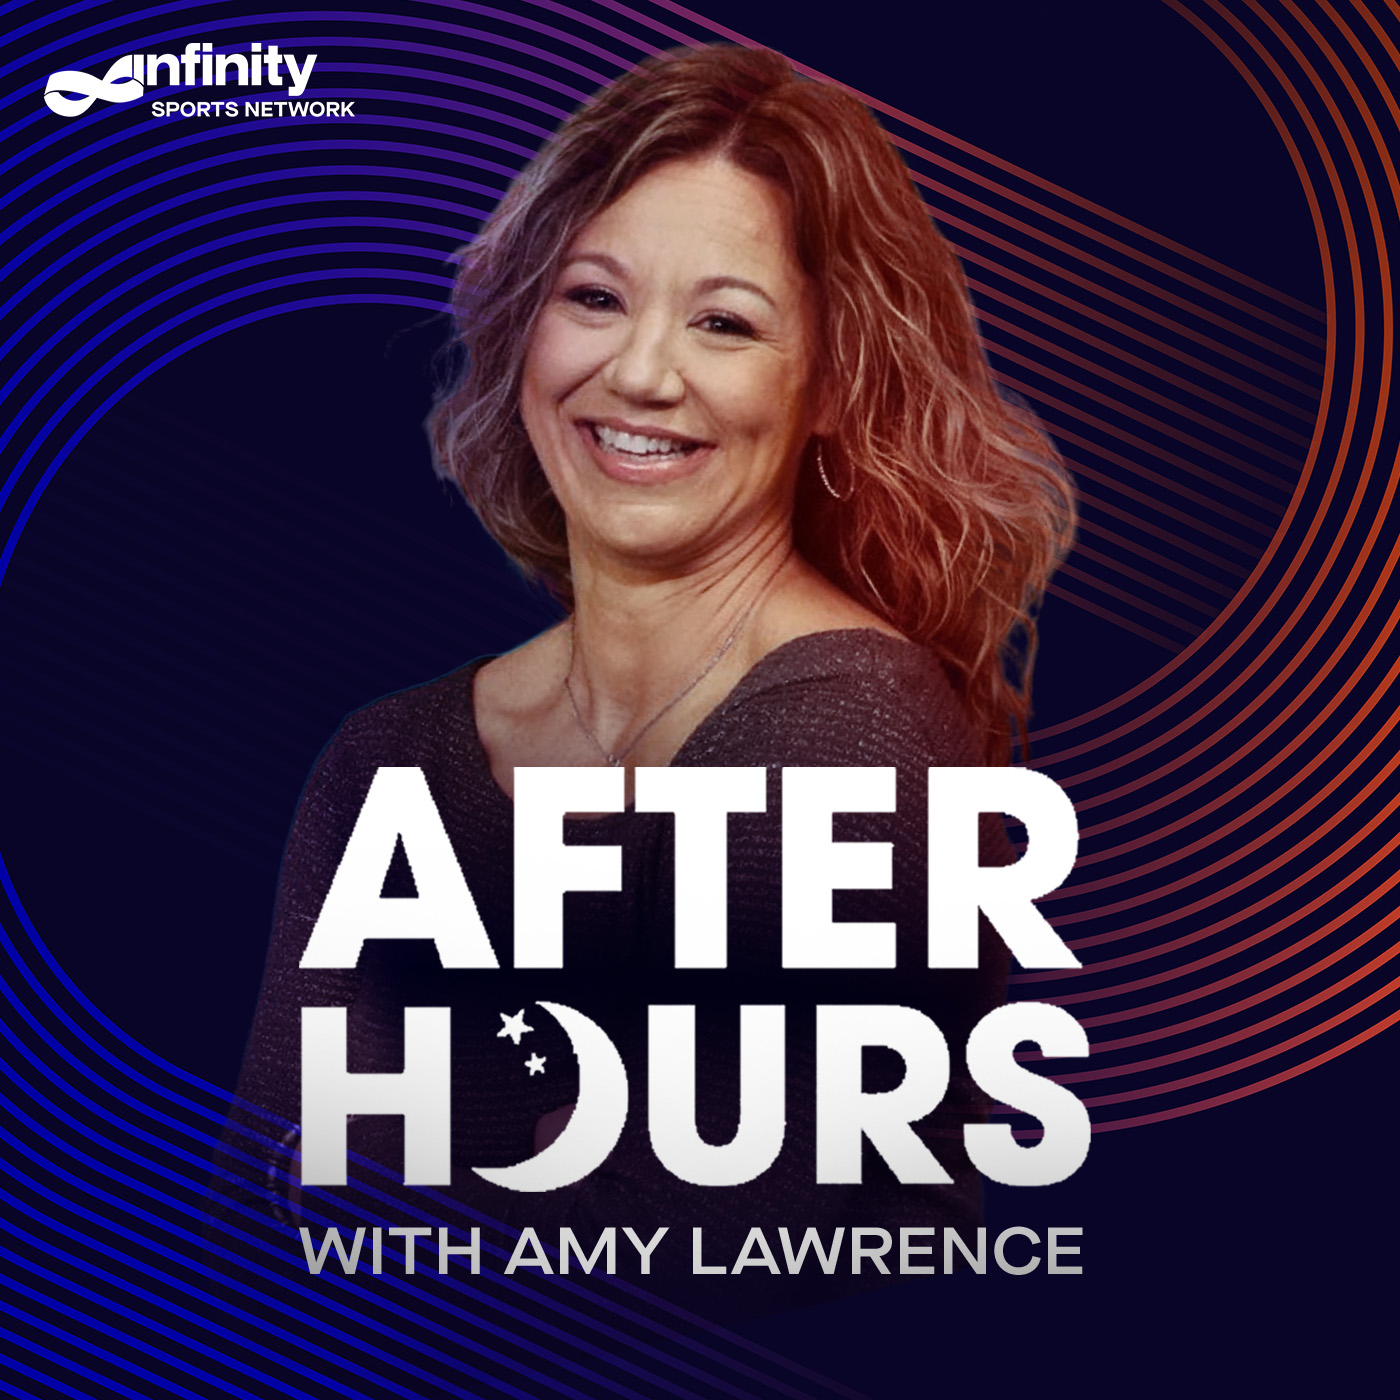 7/15/21 After Hours with Amy Lawrence PODCAST: Hour 4